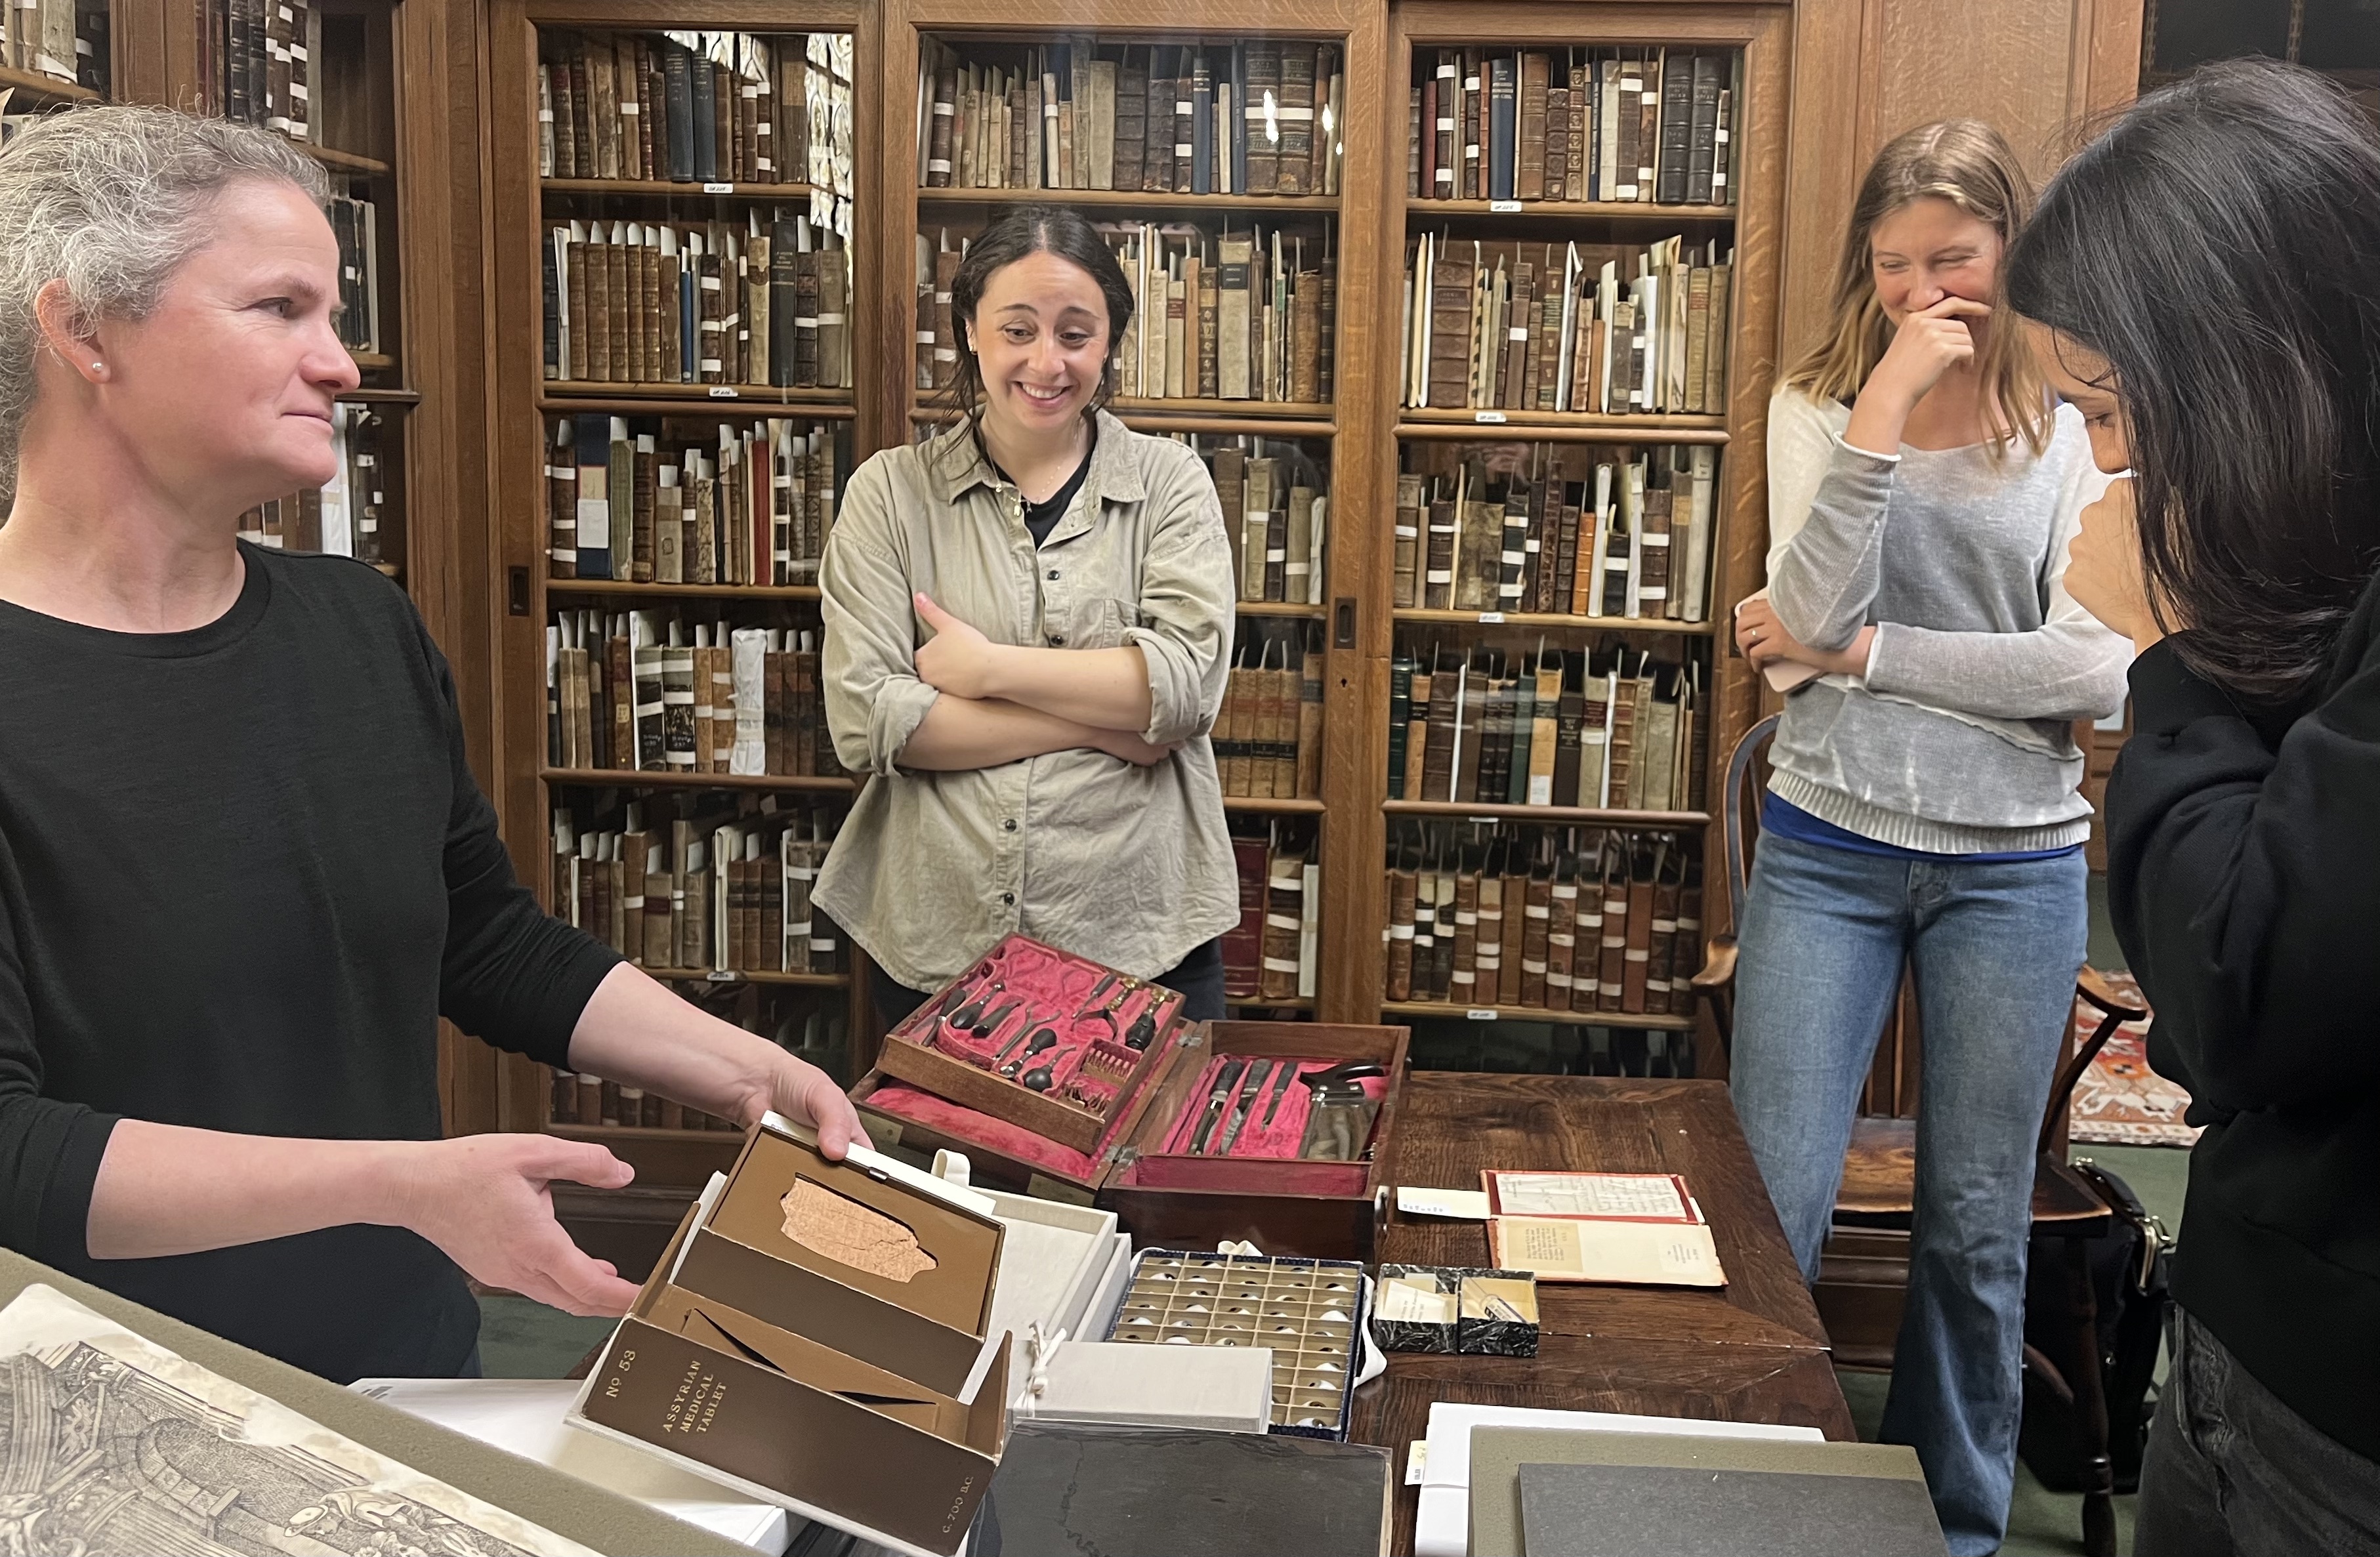 Head Librarian Dr. Hague-Yearl at the Osler Library of McGill University showing an almost 3000 year old medical tablet in the Osler collection to staff of the JPL Archives.